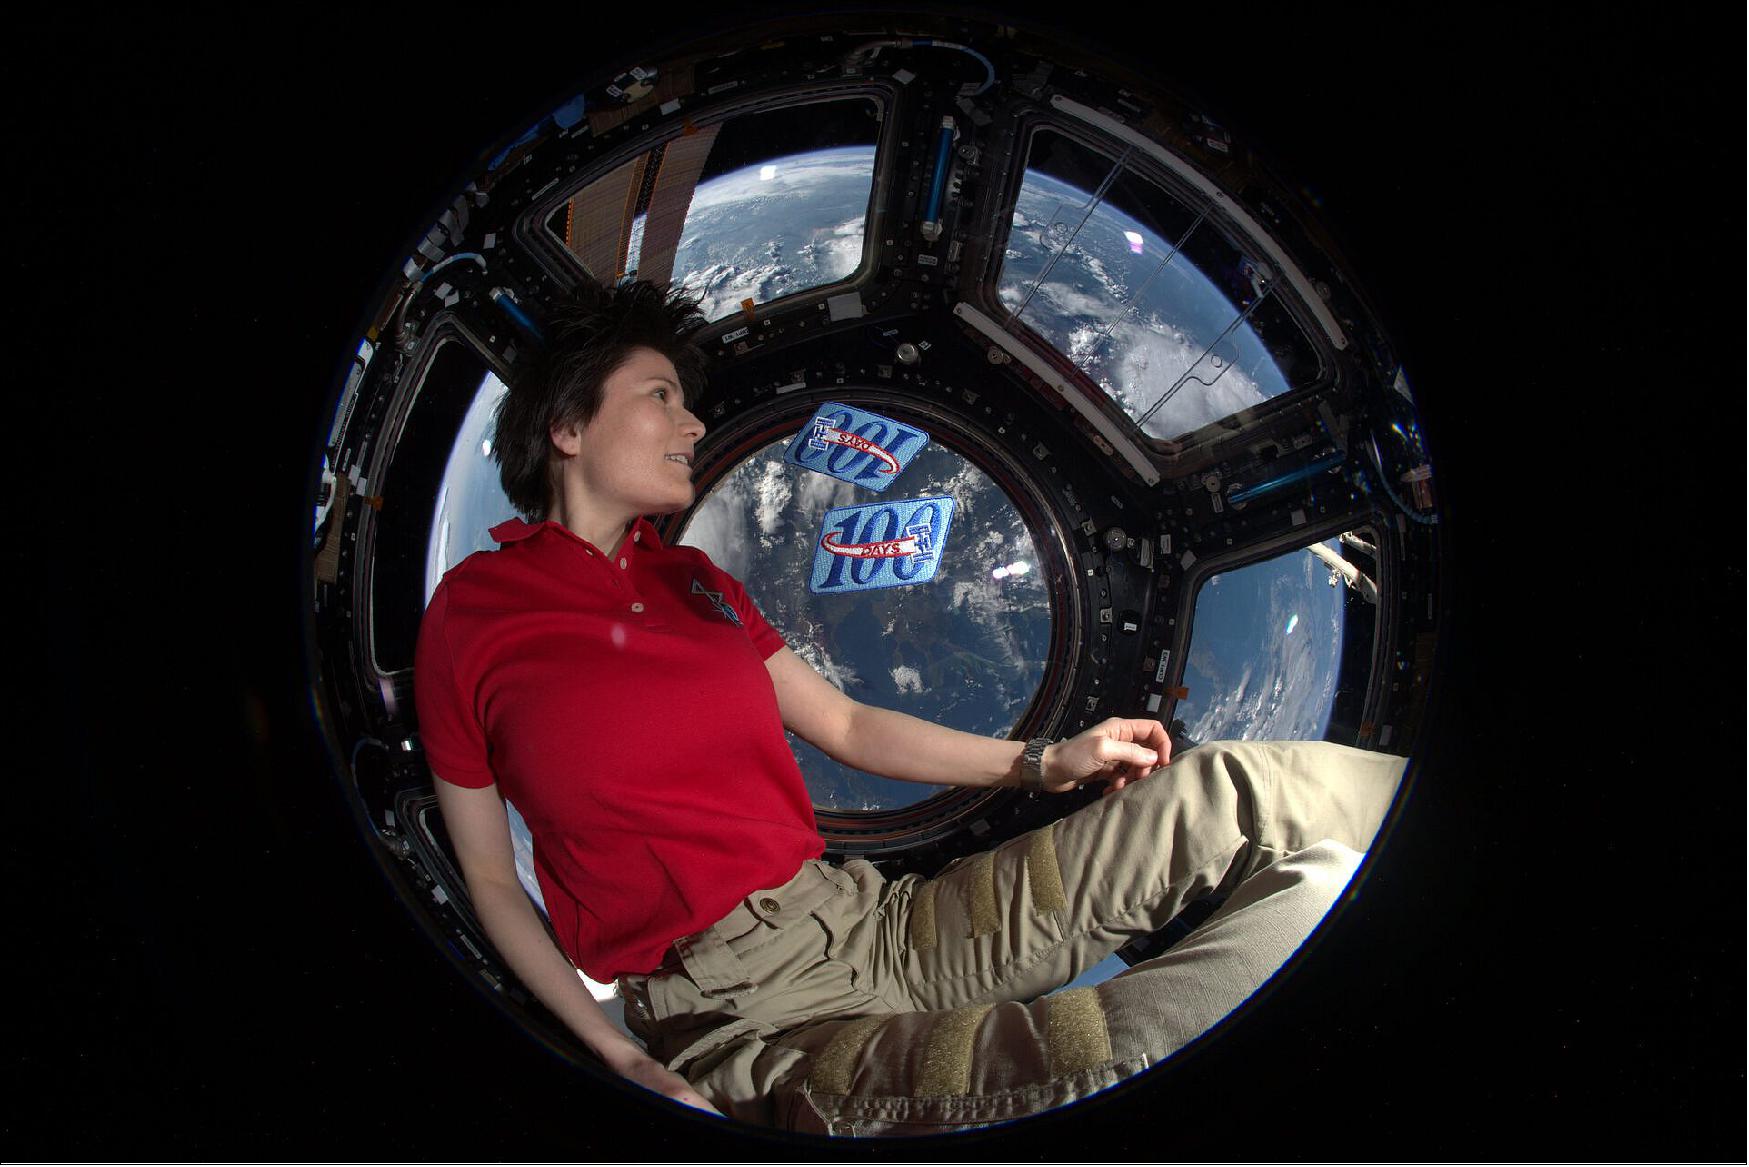 Figure 121: Samantha first flew to the International Space Station on a Soyuz spacecraft in 2014 for a mission known as ‘Futura'. Her second flight follows the second missions of her fellow 2009 astronaut classmates Alexander Gerst in 2018, Luca Parmitano in 2019 and Thomas Pesquet in 2021. It could also see a direct on-Station handover with Matthias Maurer who is scheduled to fly his first mission to the Space Station later this year. The spacecraft Samantha will fly on is not yet confirmed, but could be a SpaceX Crew Dragon or the Boeing CST-100 Starliner (image credit: ESA/NASA)